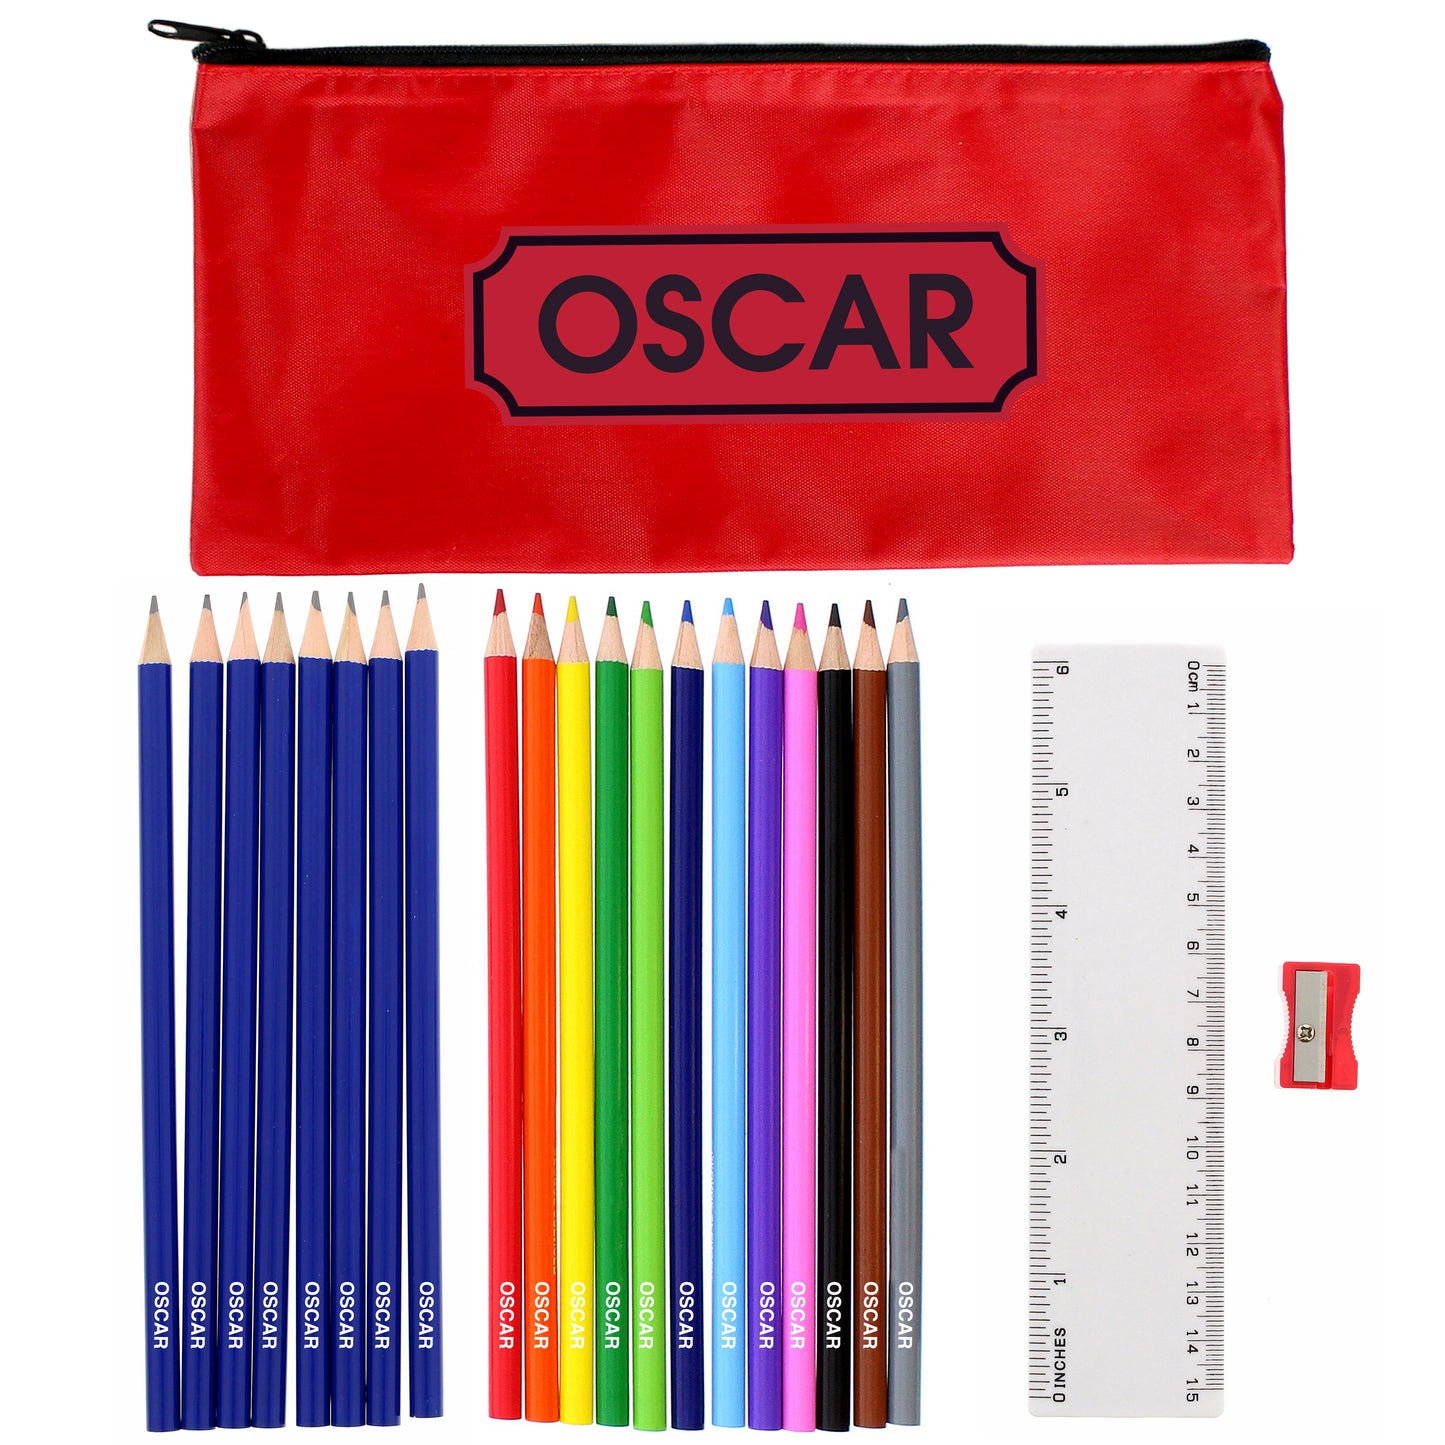 Personalised Red Pencil Case with Pencils & Crayons